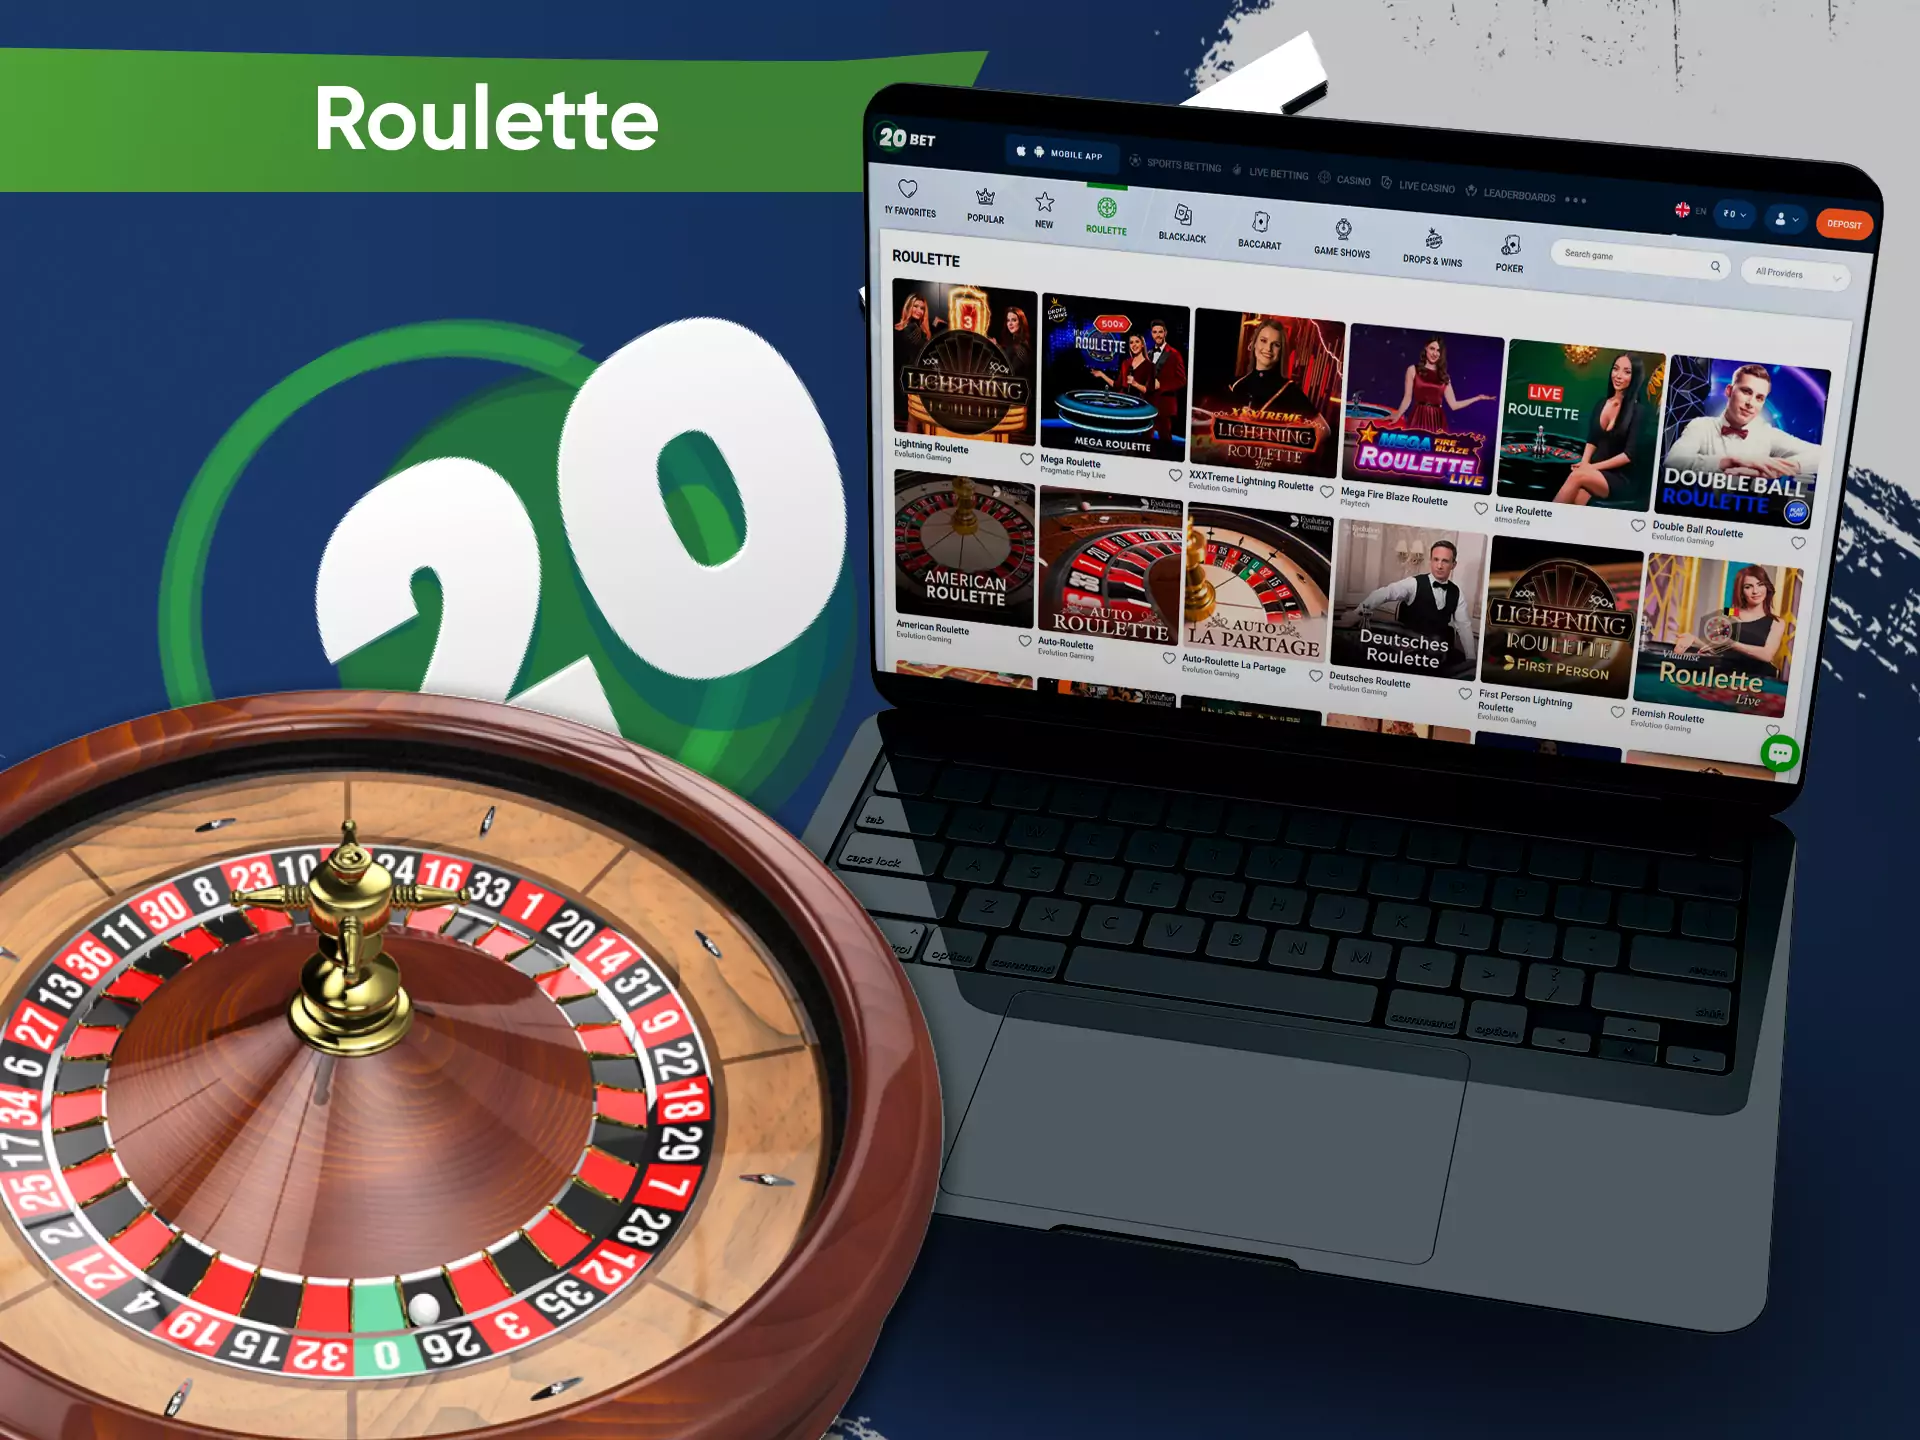 Visit the 20bet casino to play a game of roulette.